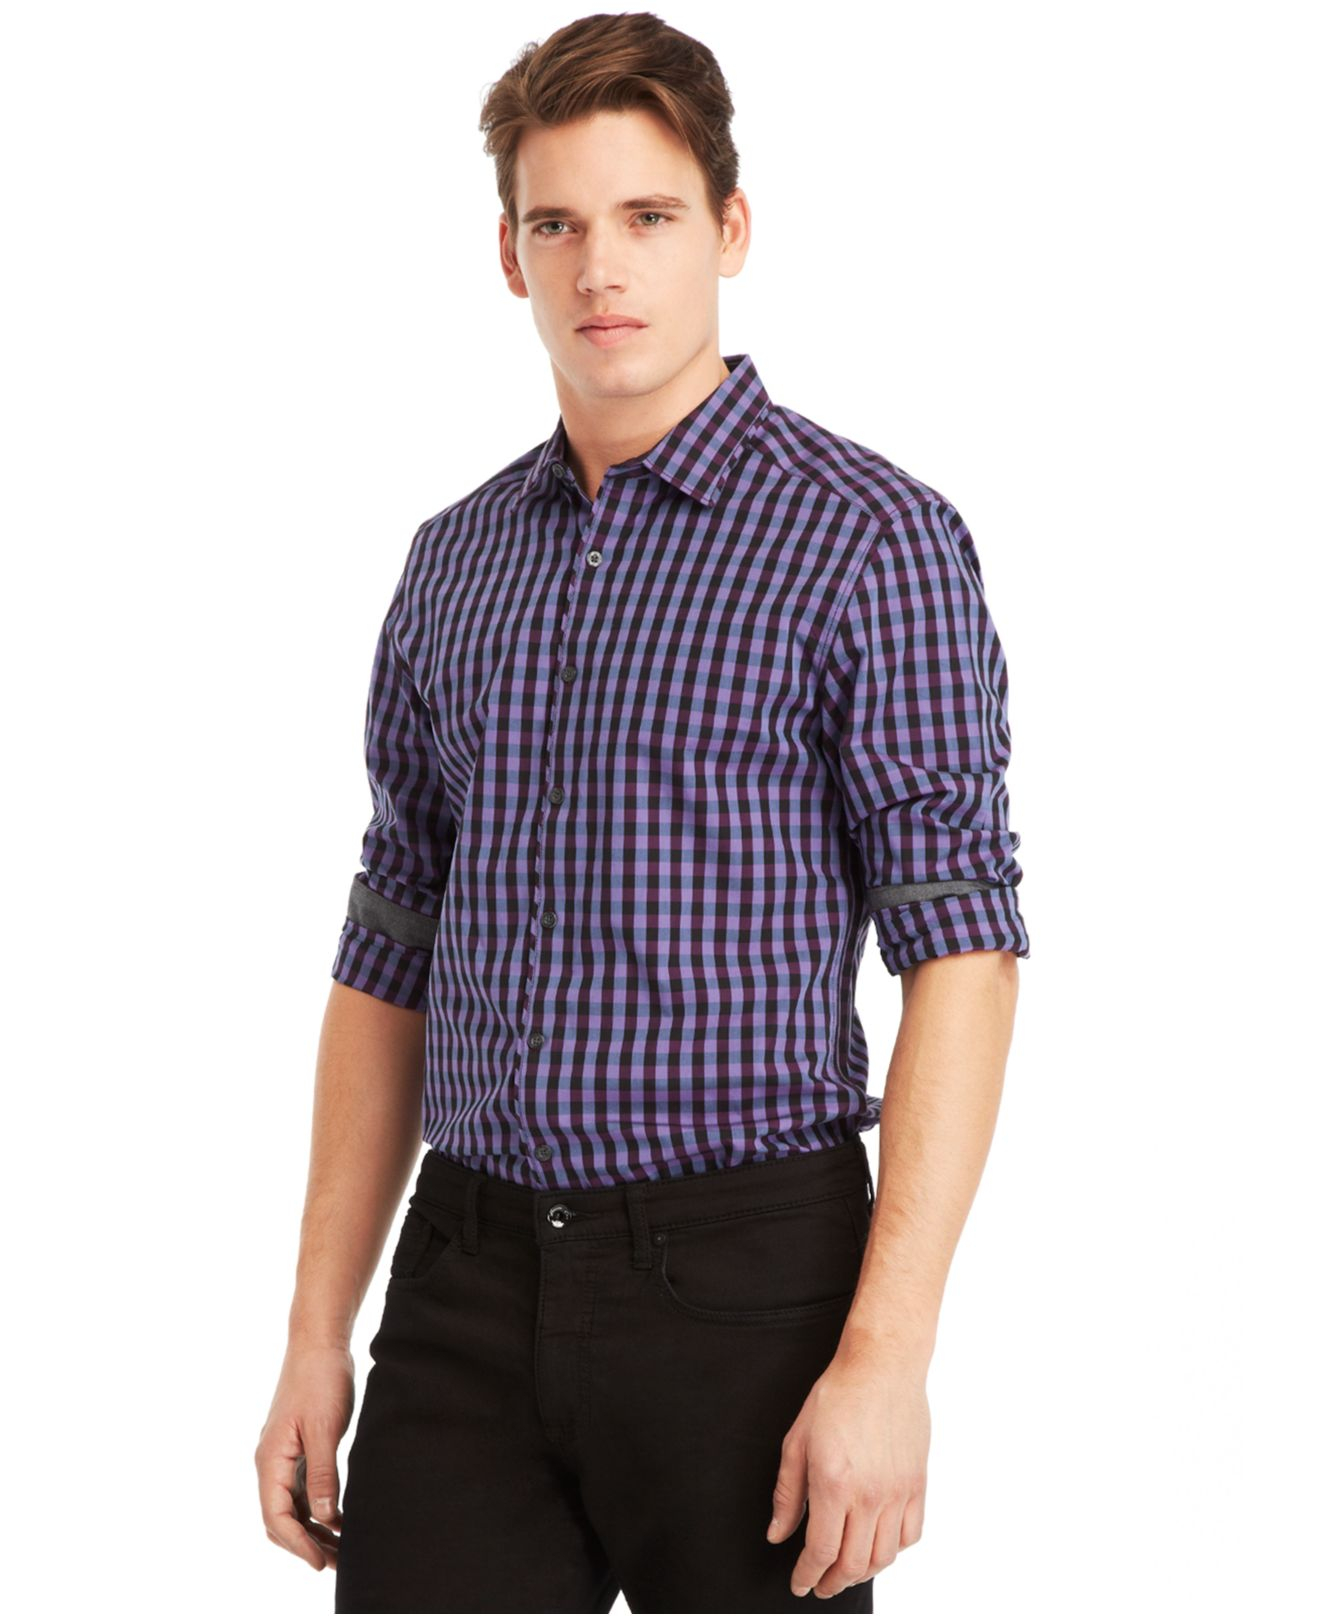 Lyst - Kenneth cole reaction Slim-Fit Iridescent Shirt in Purple for Men